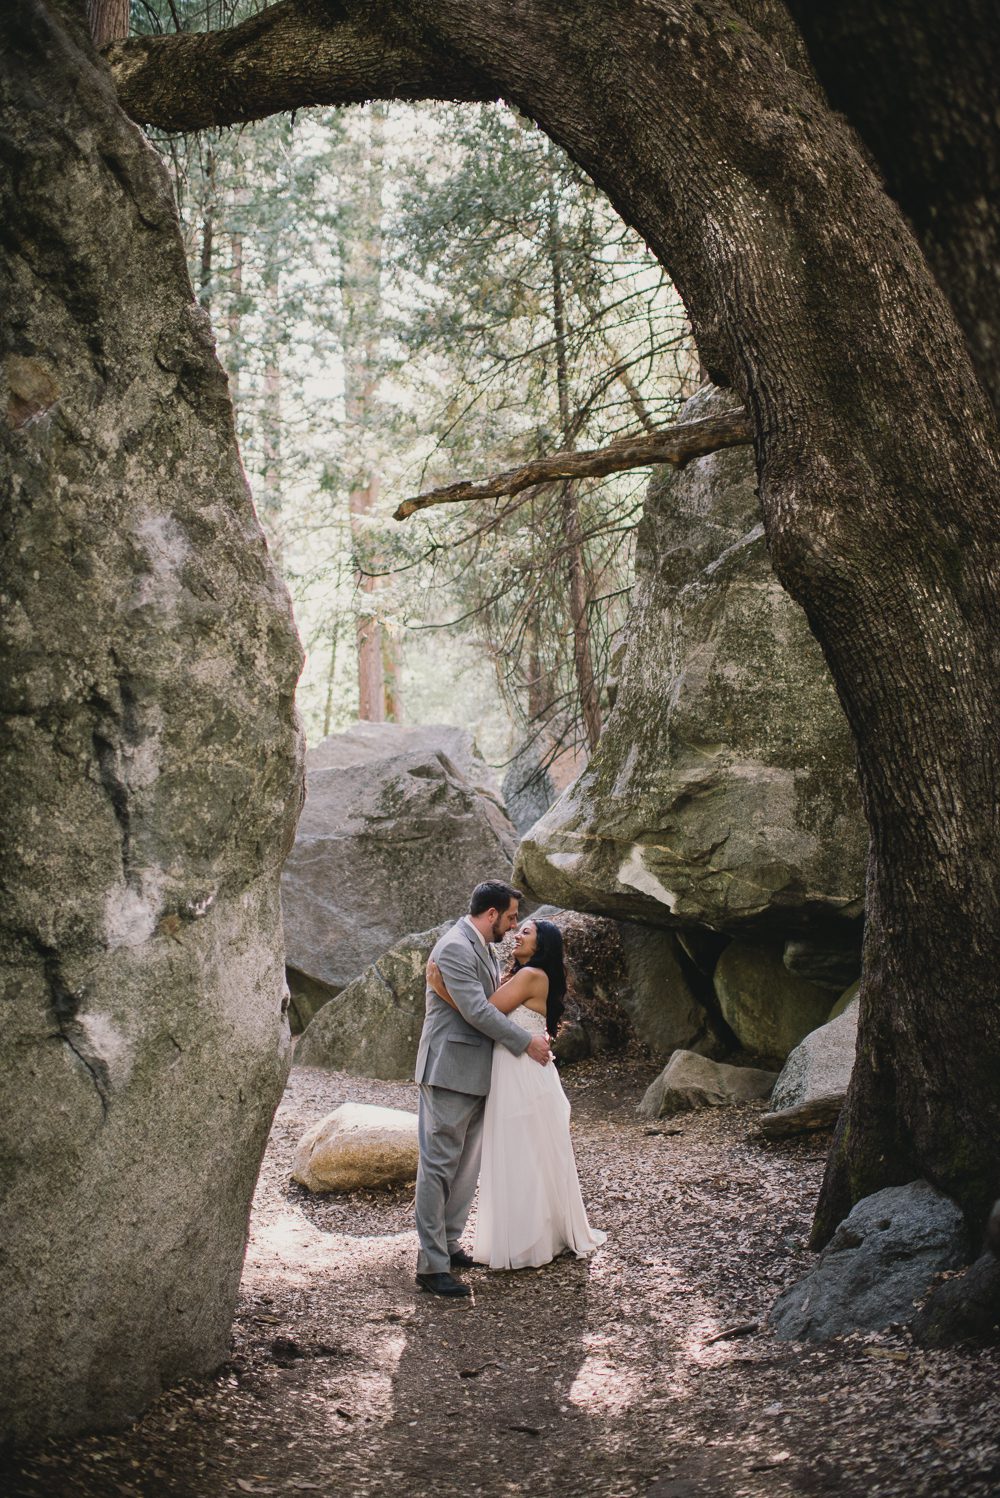 Bride and groom in front of rocks with light streaming in